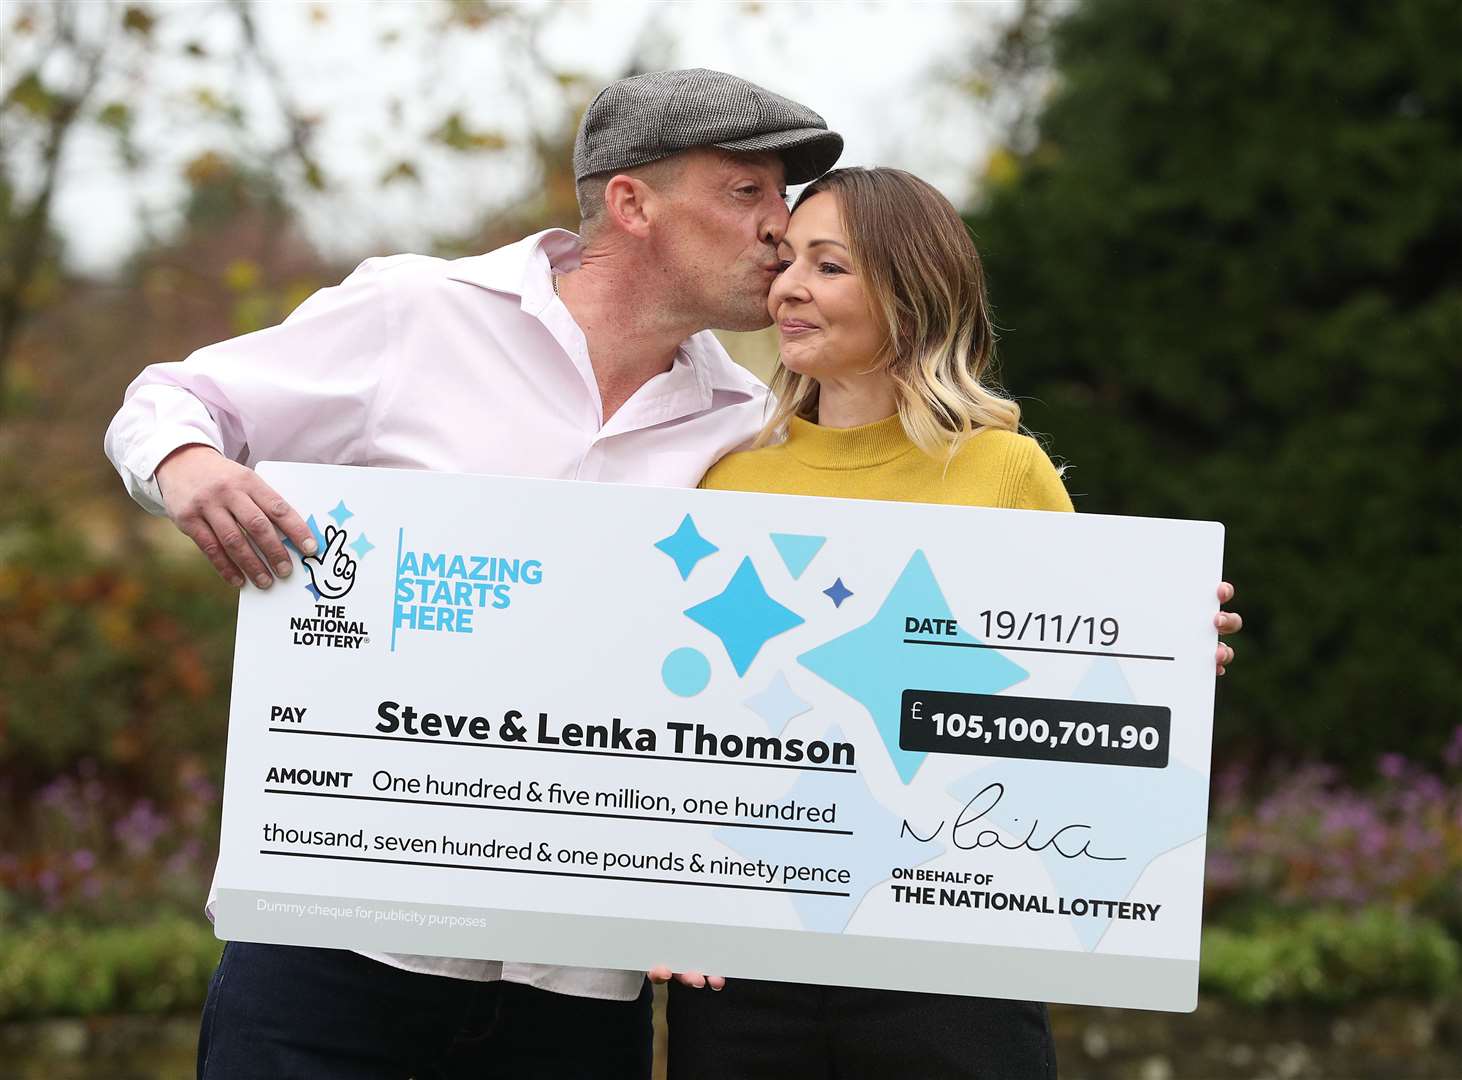 Self-employed builder Steve Thomson, and his wife Lenka Thomson, from Selsey, West Sussex, celebrate their £105 million EuroMillions win. (Andrew Matthews/PA)